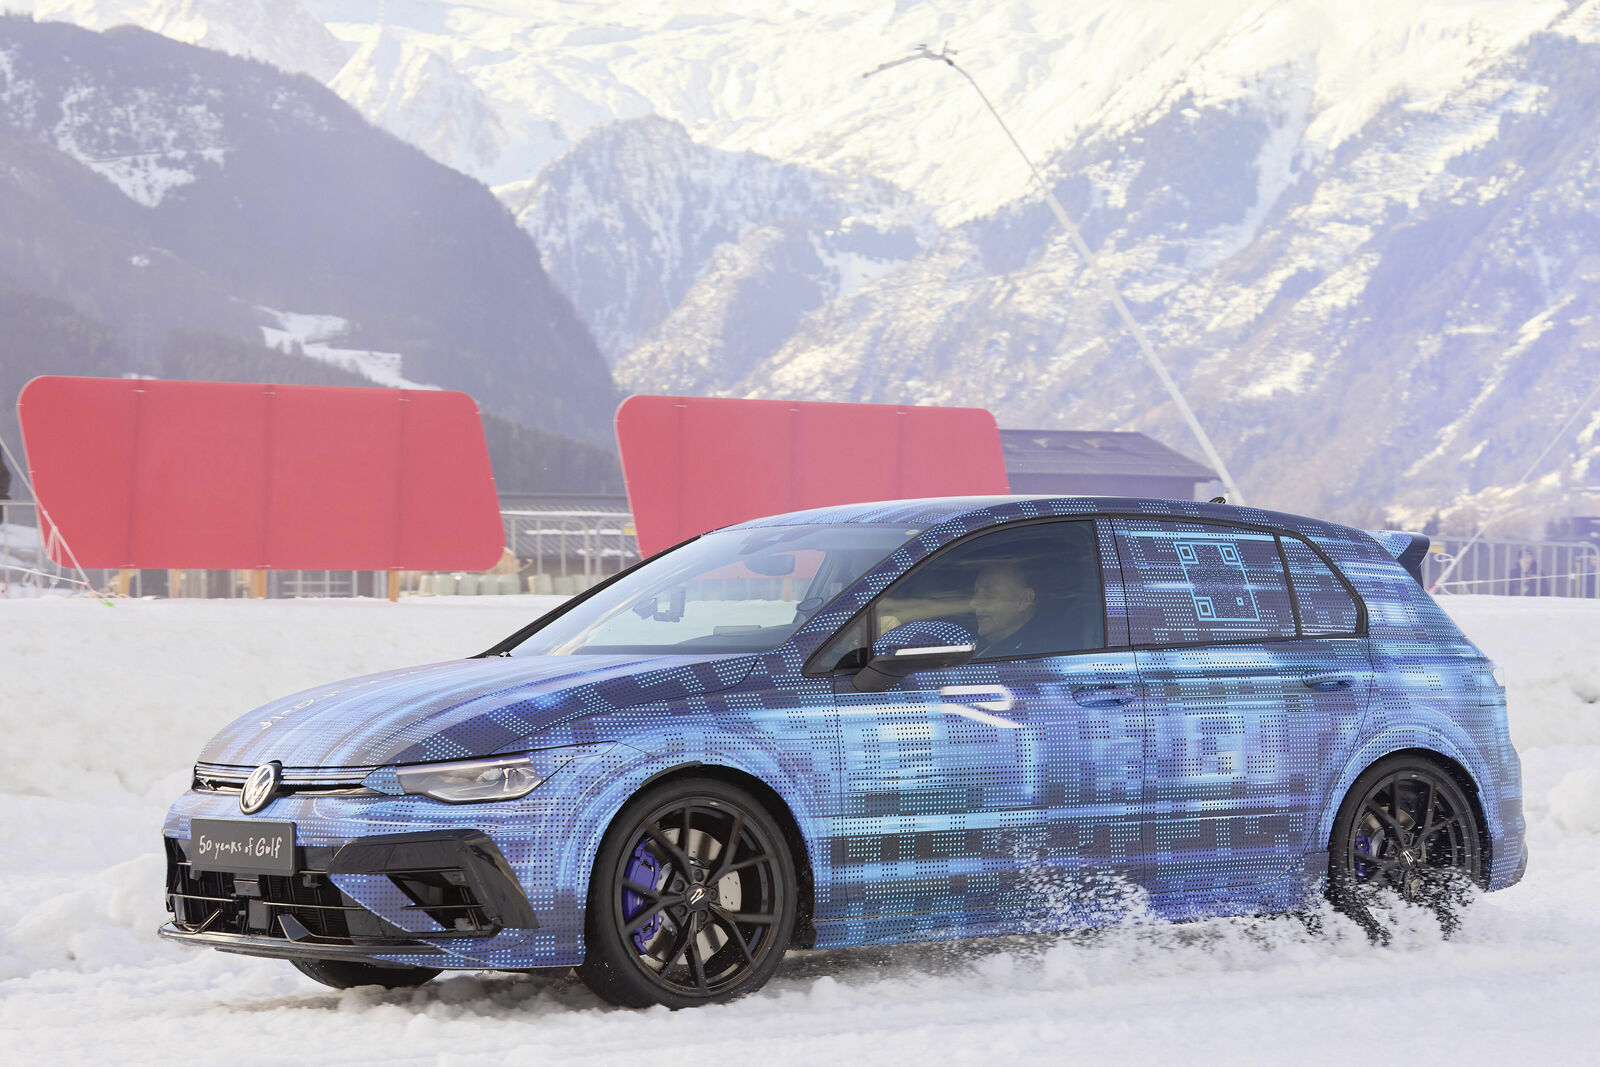 Ice Race in Zell am See: Volkswagen offers a first glimpse of the new Golf R